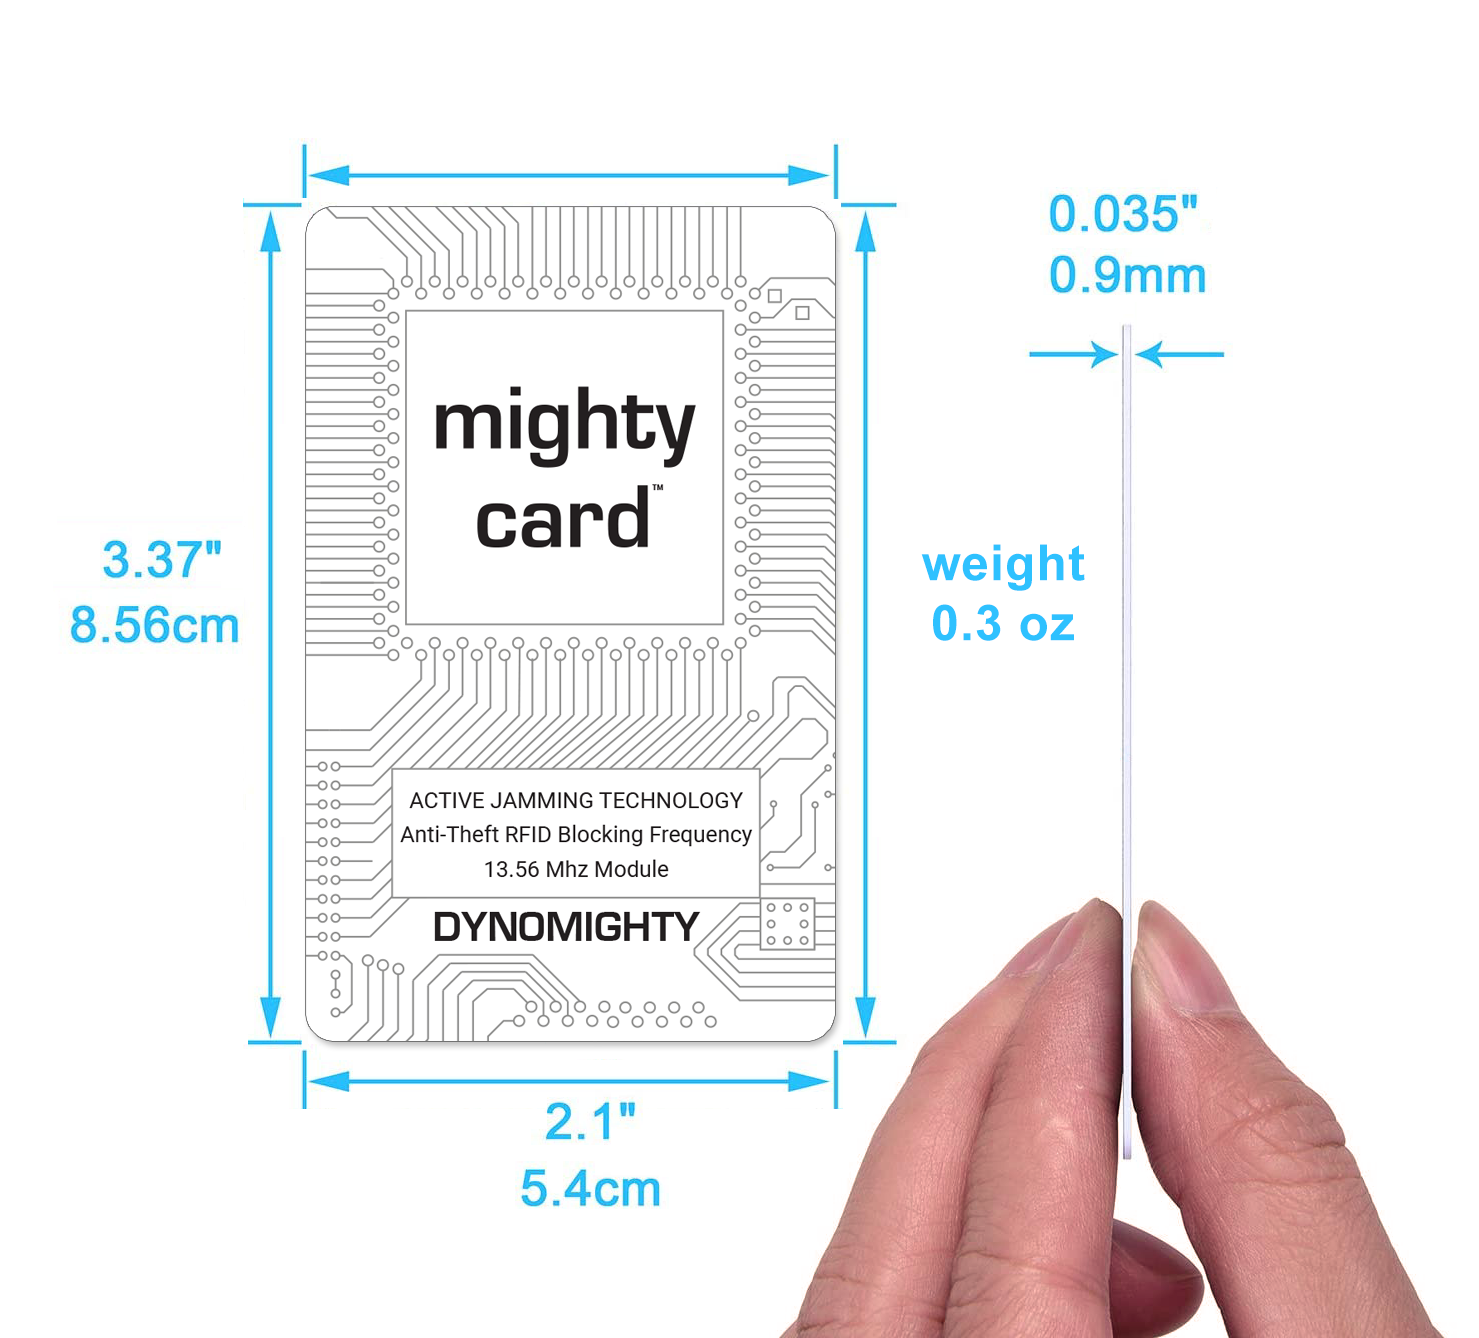 mighty card RFID blocker credit card size and measurements as thin as a standard credit card